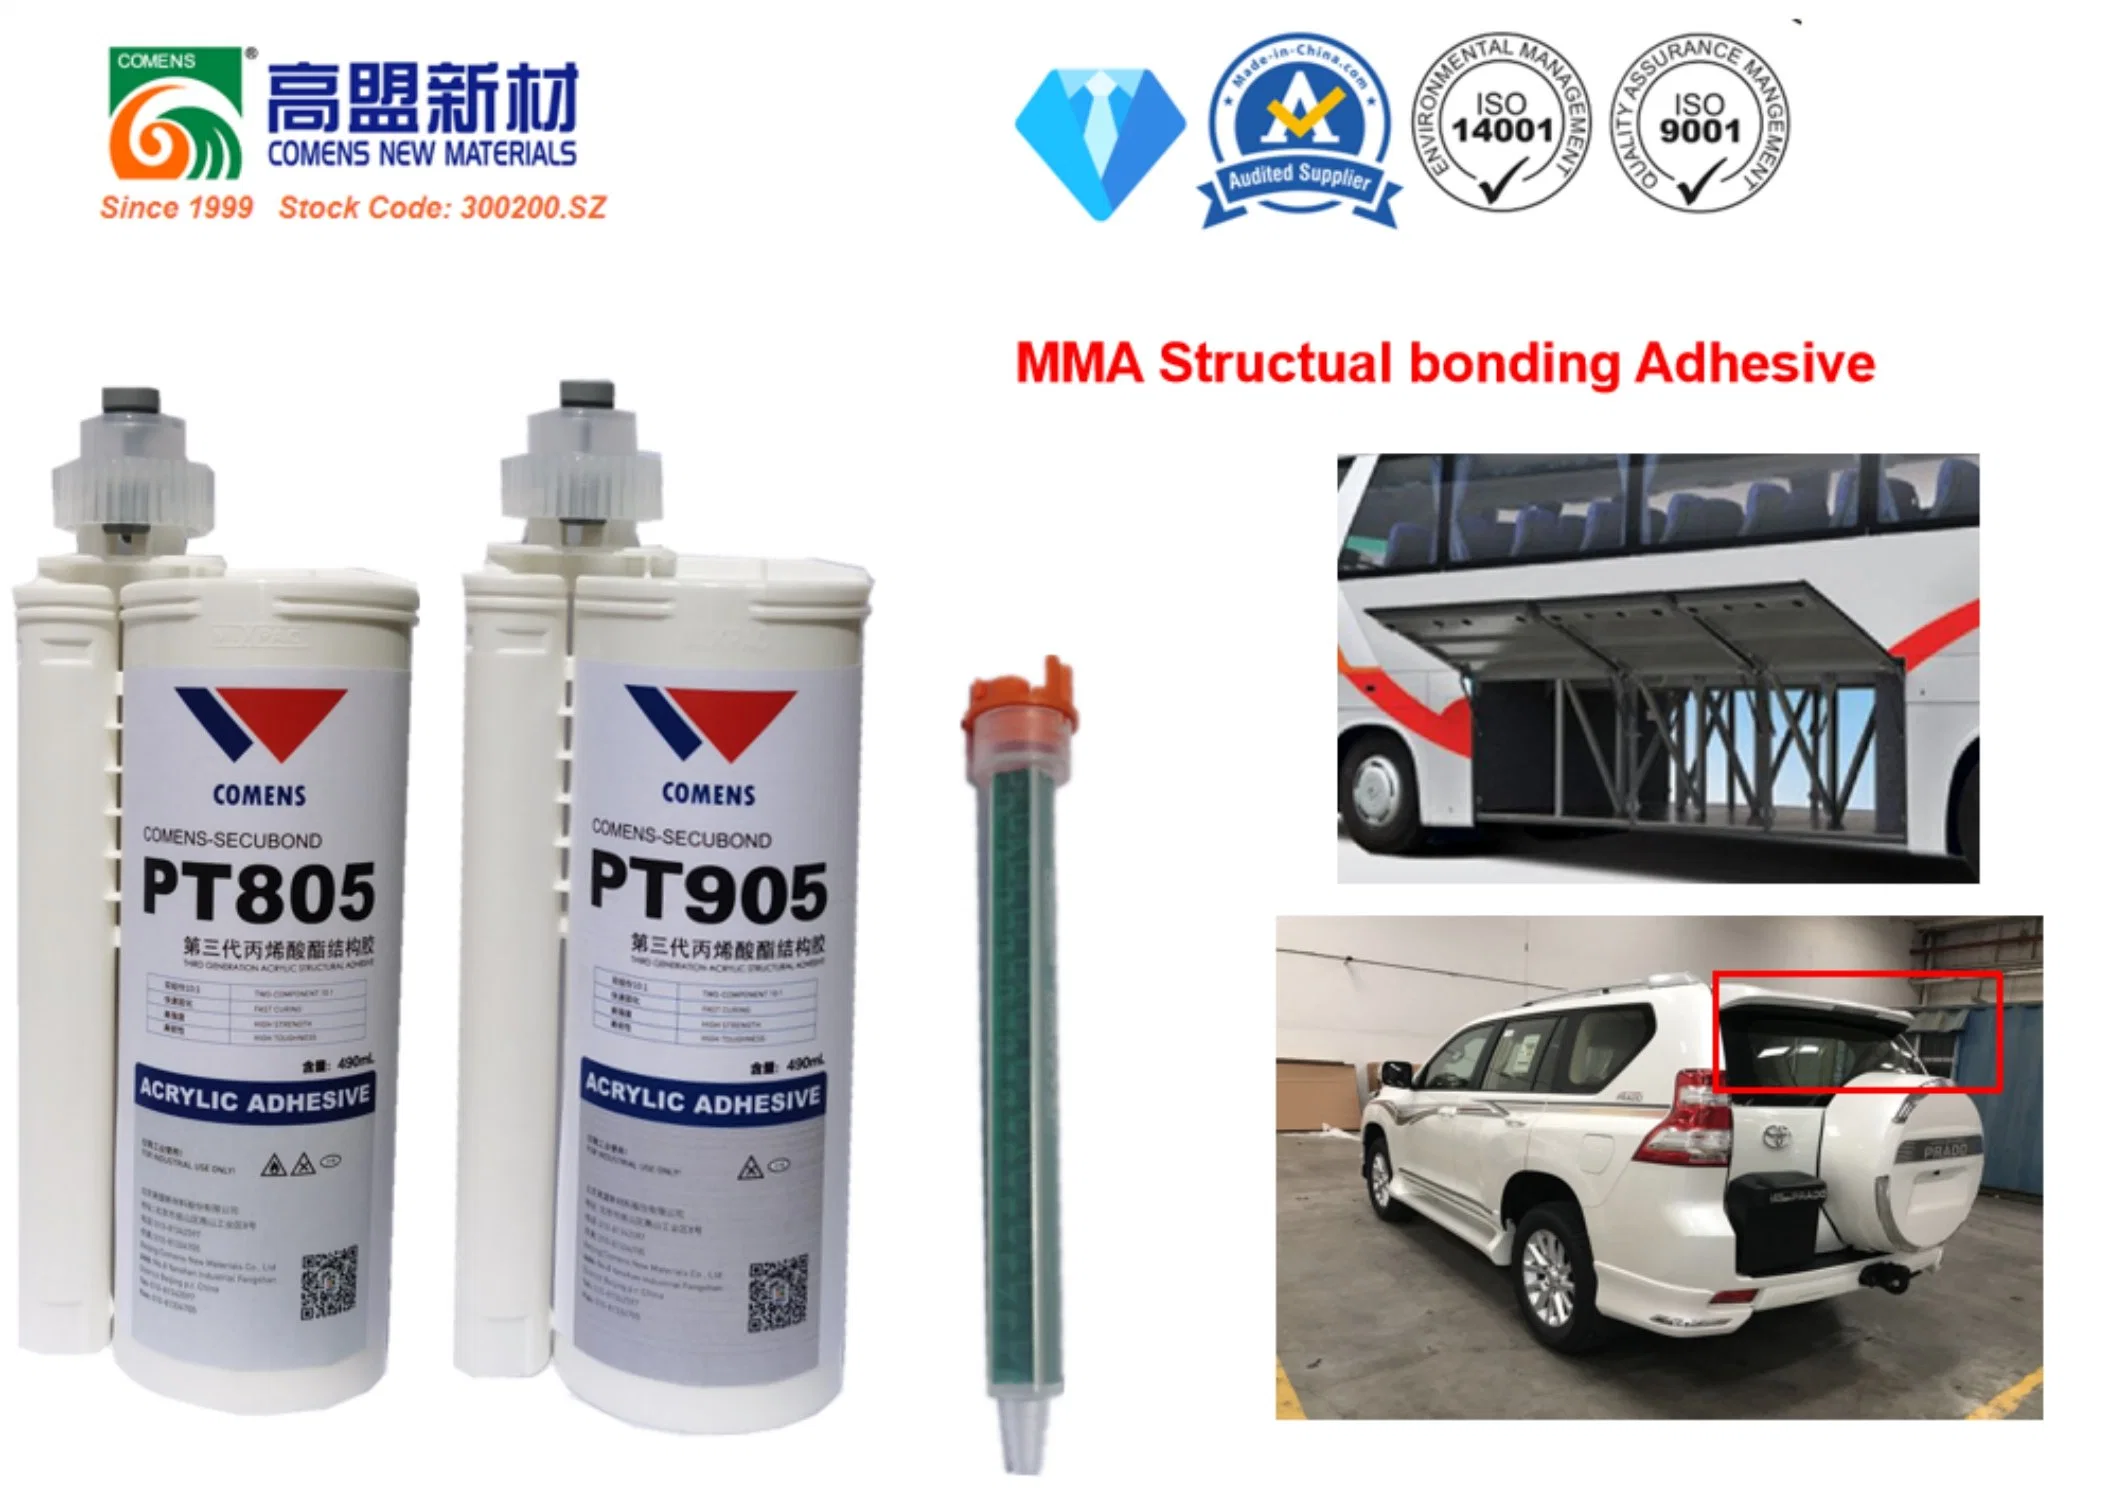 Weather Resistant Two-Component Structual Adhesive for Bus Accessories Bonding (PT905)